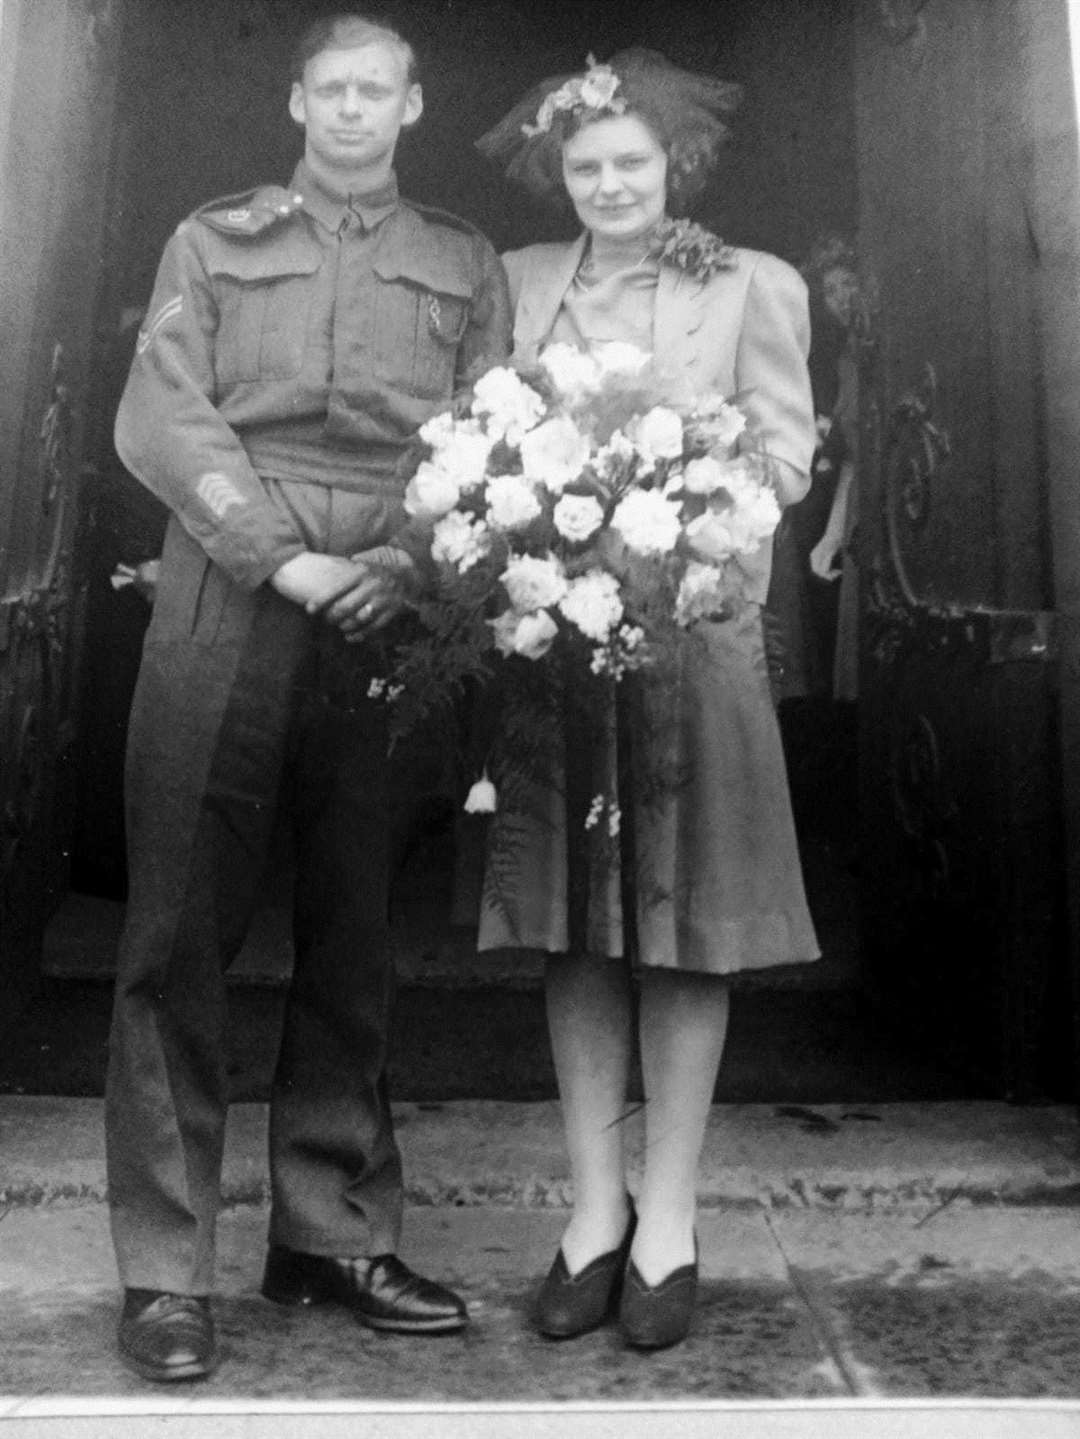 Blanche and John's wedding on May, 16, 1944